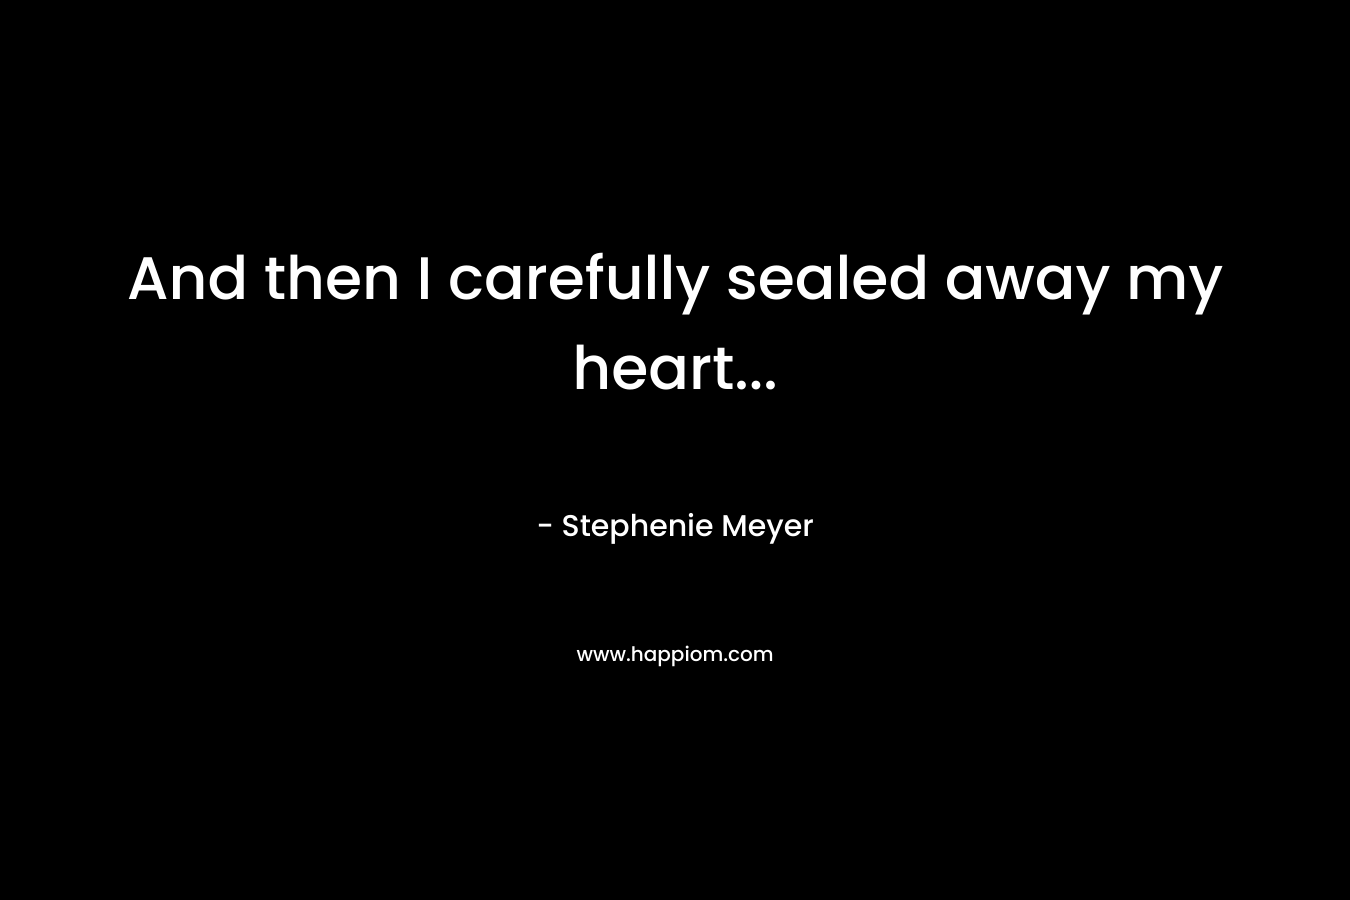 And then I carefully sealed away my heart...